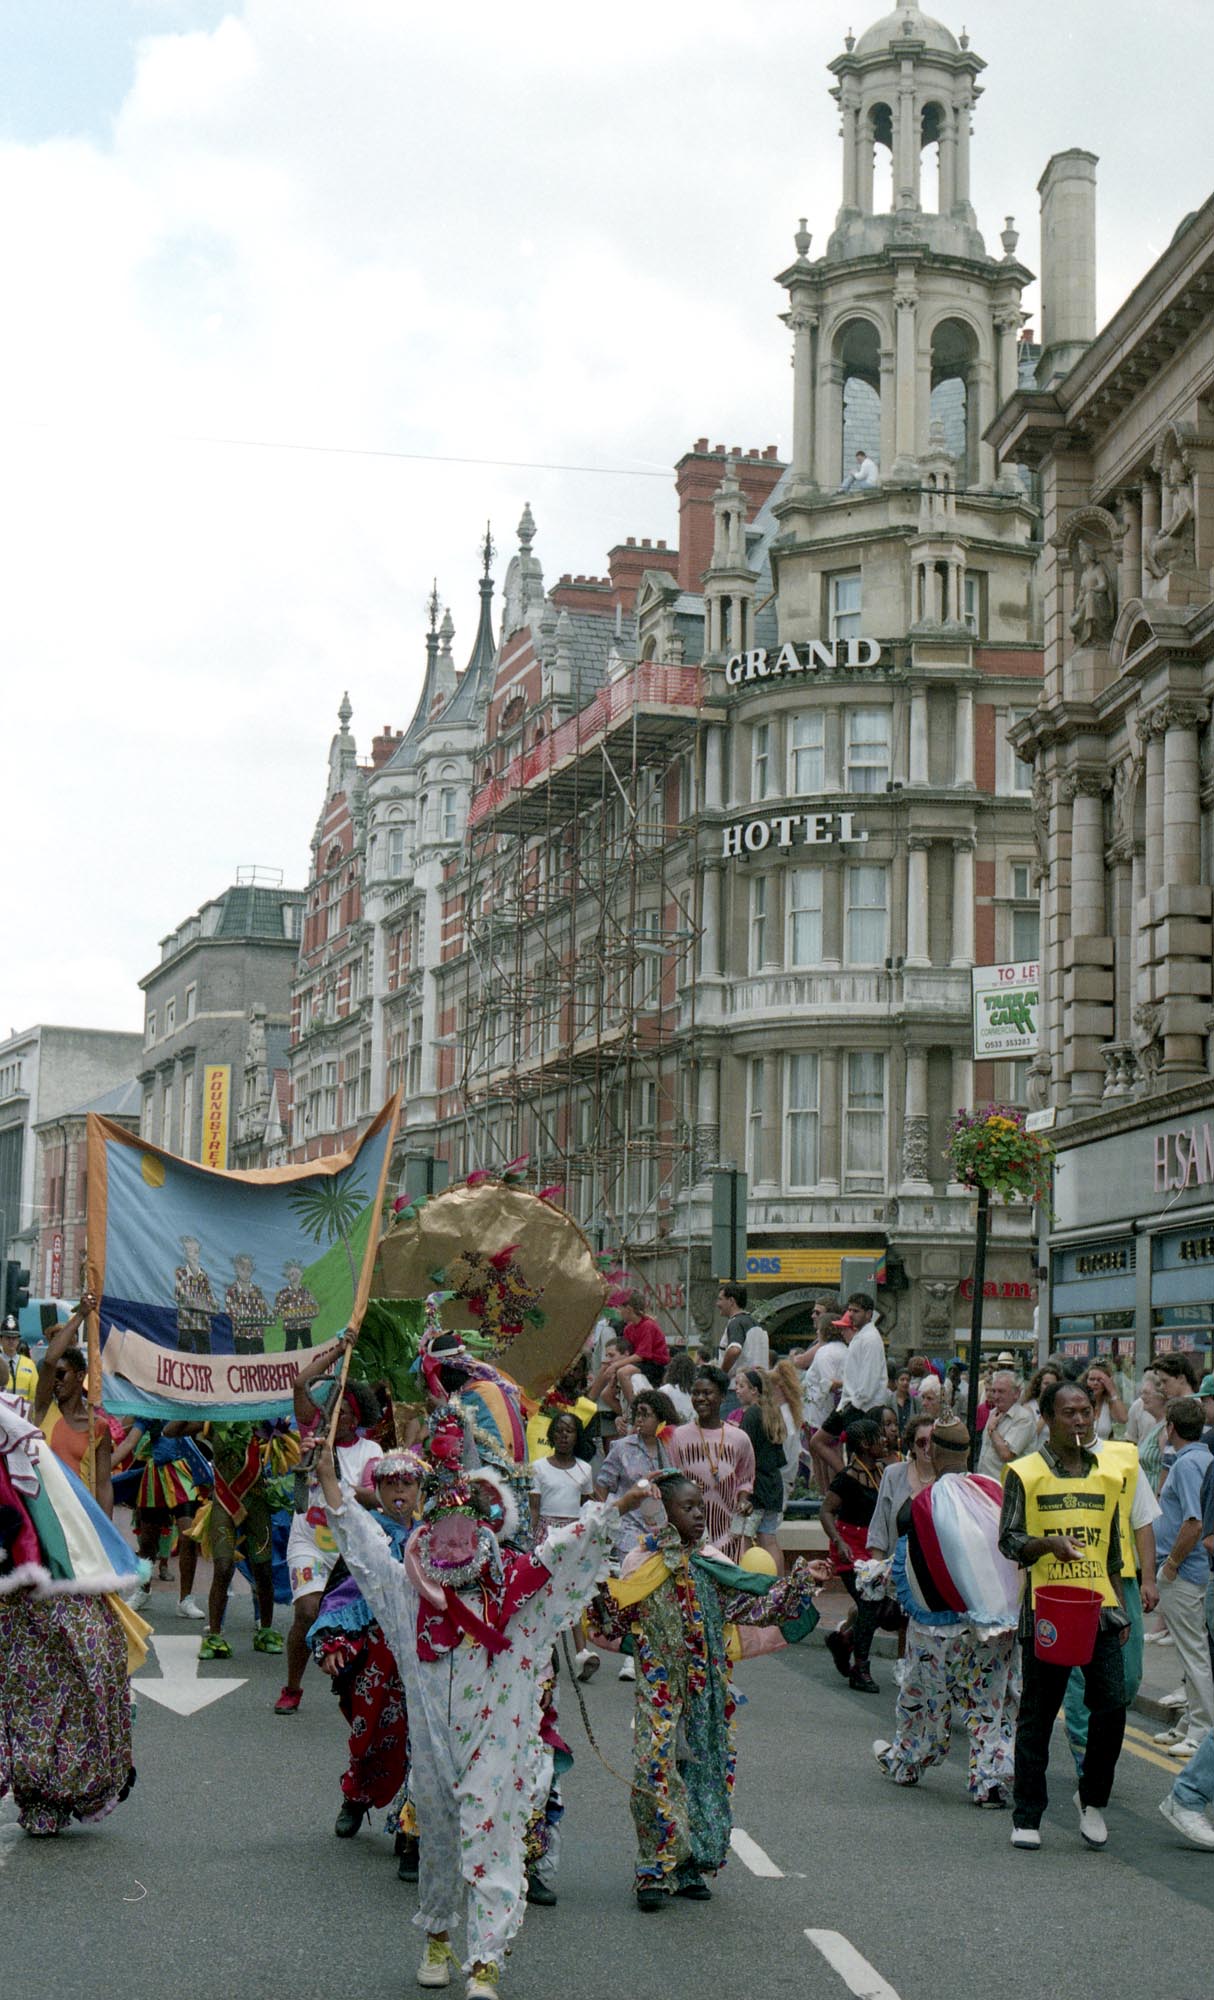 Many roads are closed for the Carnival Parade, seen here on Granby Street in 1992 - 